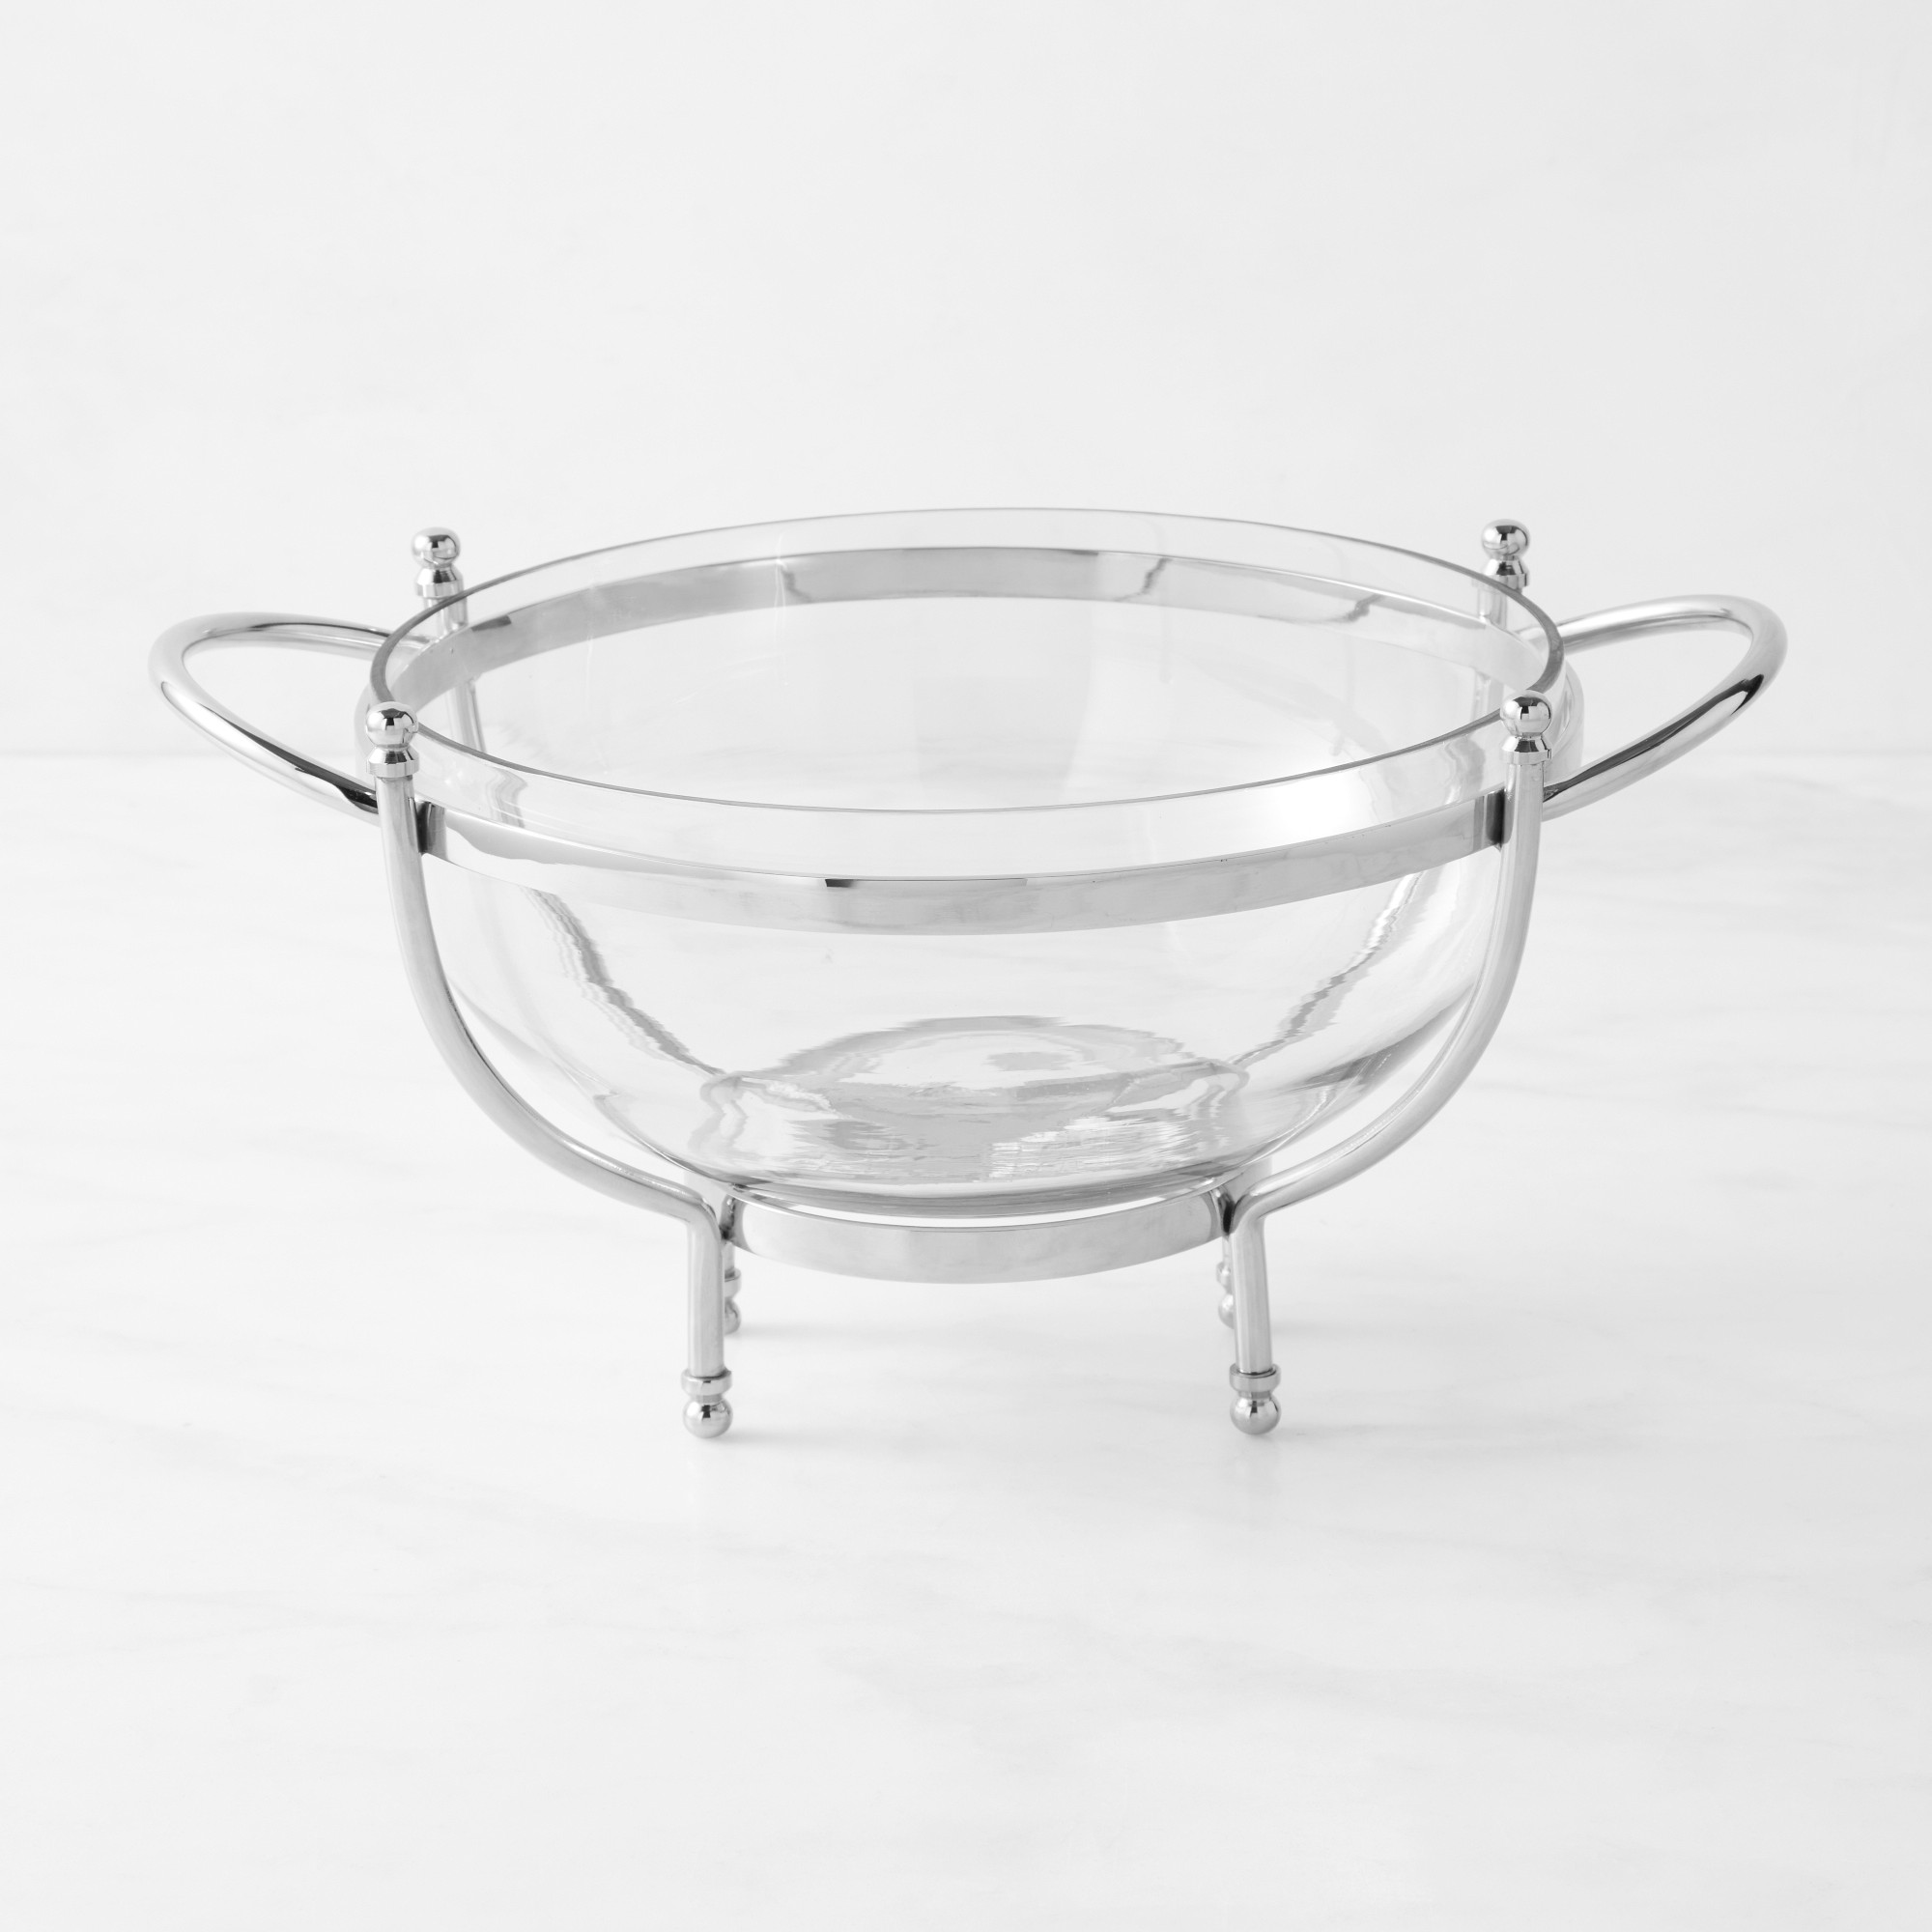 Stainless-Steel and Glass Serving Bowl